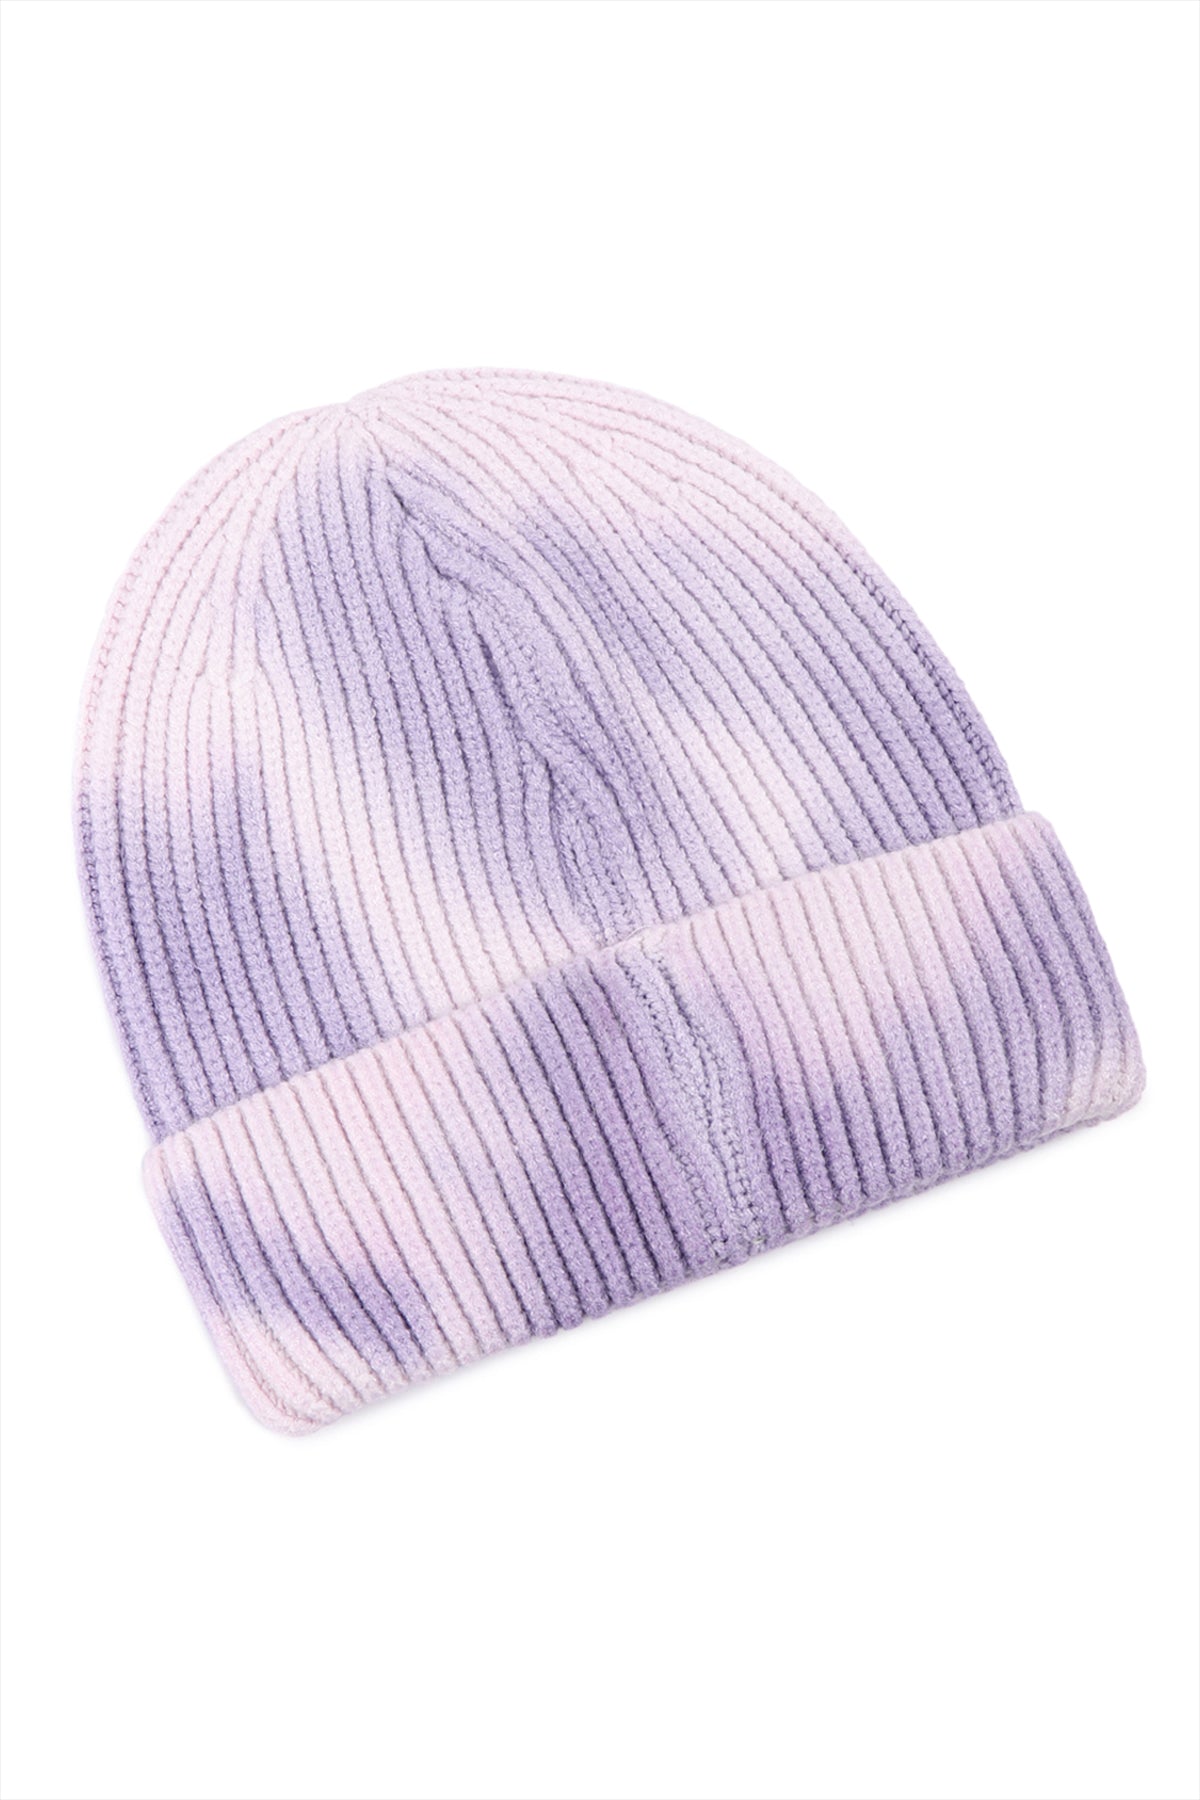 TIE DYE KNITTED BEANIE (NOW $2.50 ONLY!)